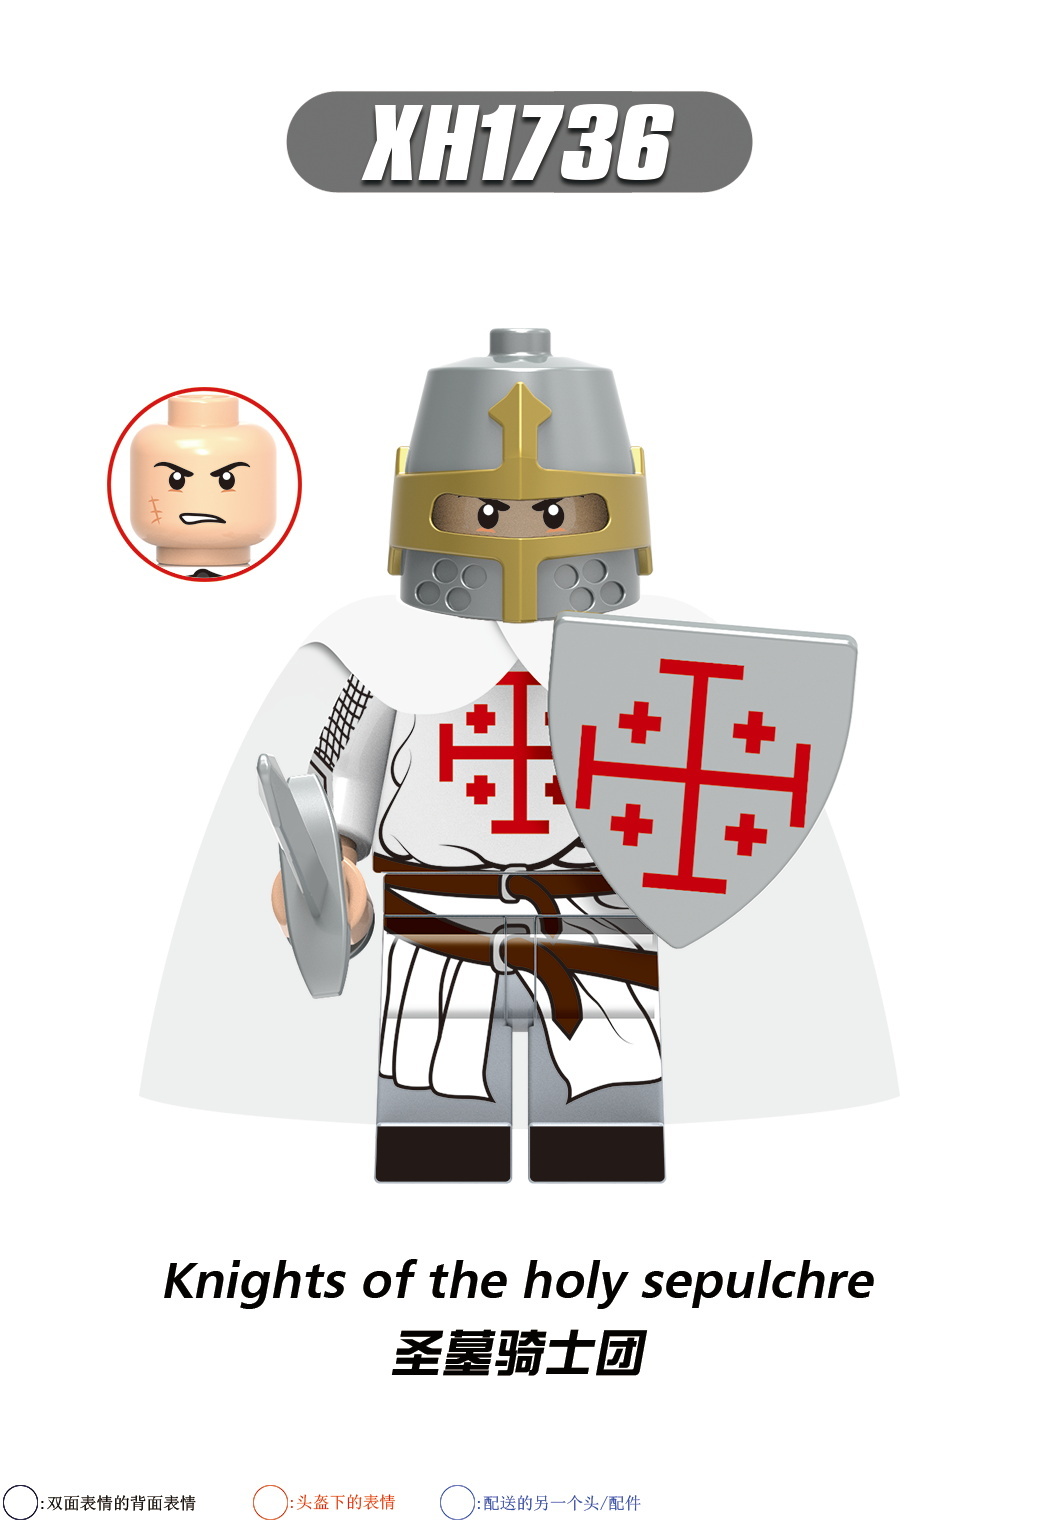 XH1730 1731 1732 1733 1734 1735 1736 1737 X0316 Building Blocks Roman Soldier Sparta Heroes Knigth Woman Warrior Bricks Educational Toys for Kids Gifts 